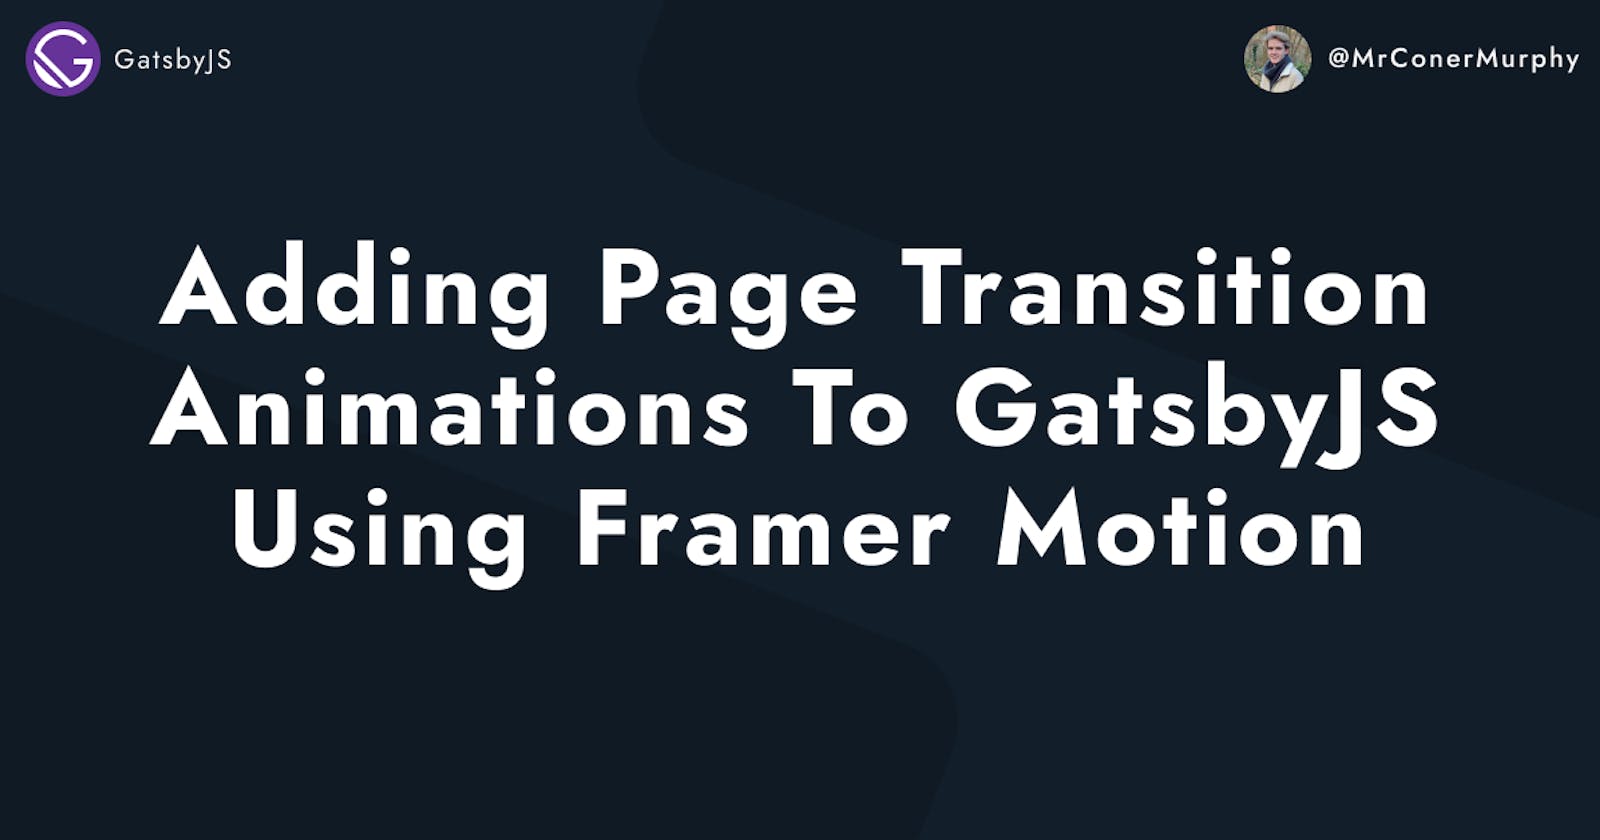 How to Add Page Transition Animations to GatsbyJS Using Framer Motion